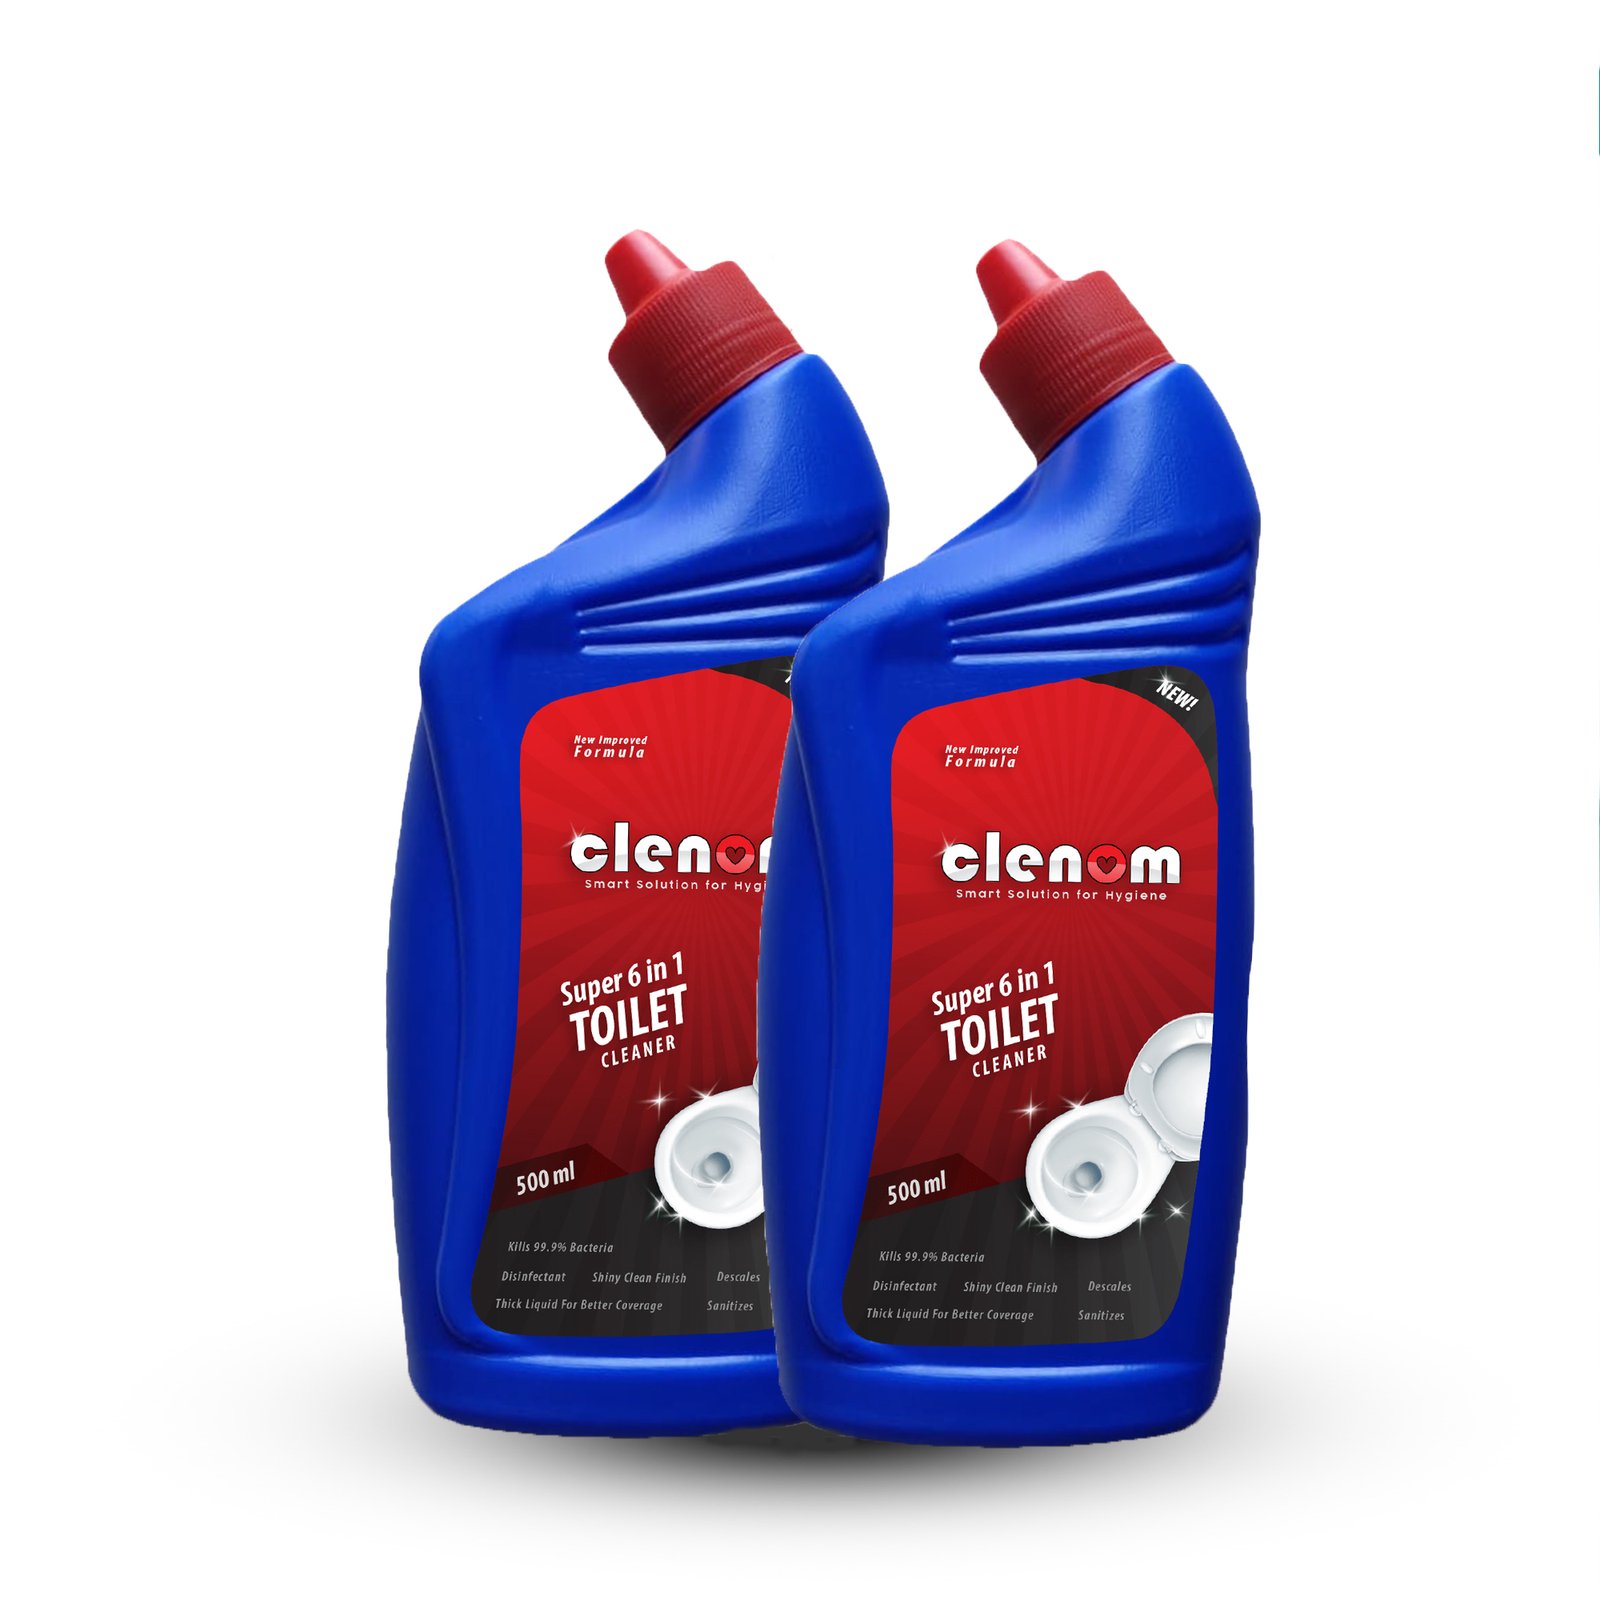 Clenom Disinfectant Toilet Cleaner (Pack of 2 )Each 500ml